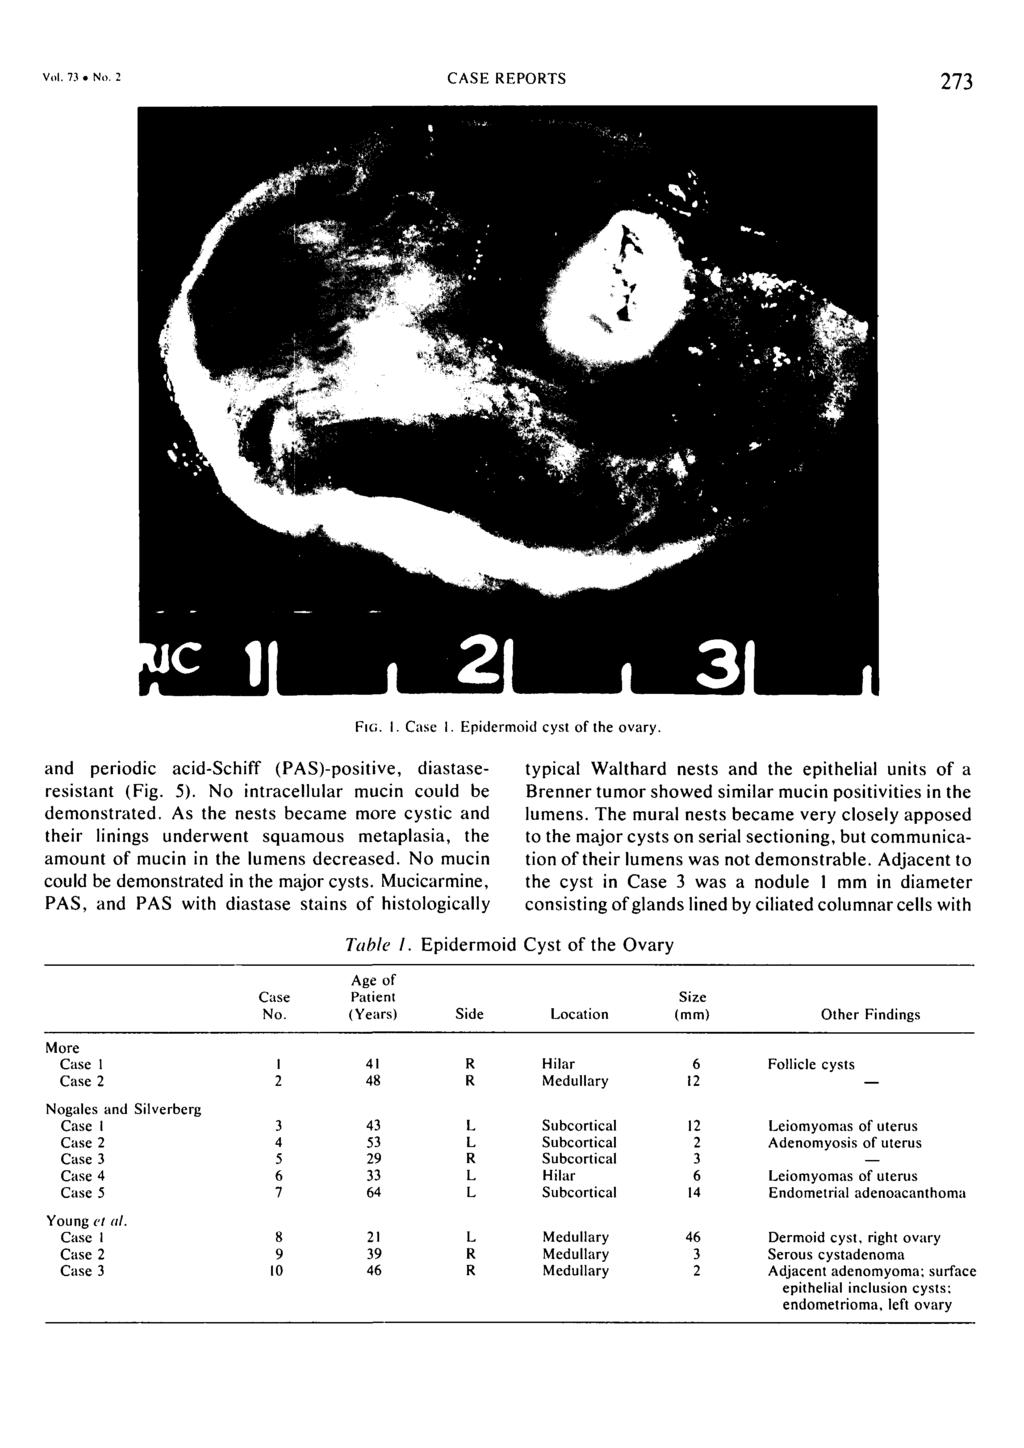 Vol. 7 No. CASE EPOTS 7 FIG. I. Case I. Epidermoid cyst of the ovary. and periodic acid-schiff (PAS)-positive, diastaseresistant (Fig. 5). No intracellular mucin could be demonstrated.